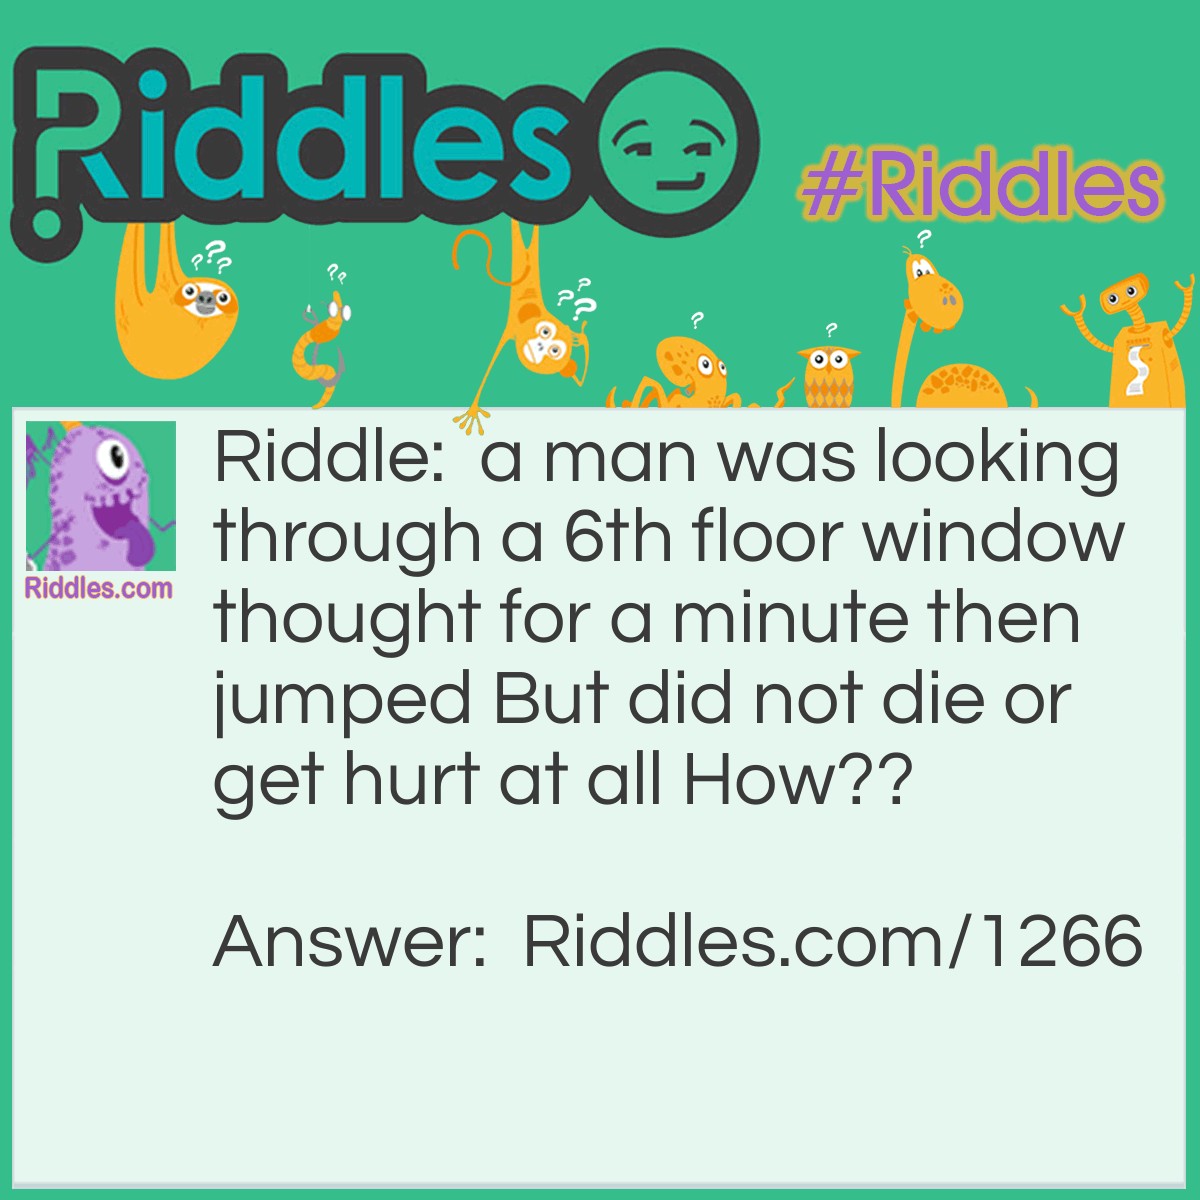 Riddle: A man was looking through a 6th floor window,  thought for a minute then jumped,  but did not die or get hurt at all.  How? Answer: He jumped in the window. He was outside the window  He was a window washer!!!